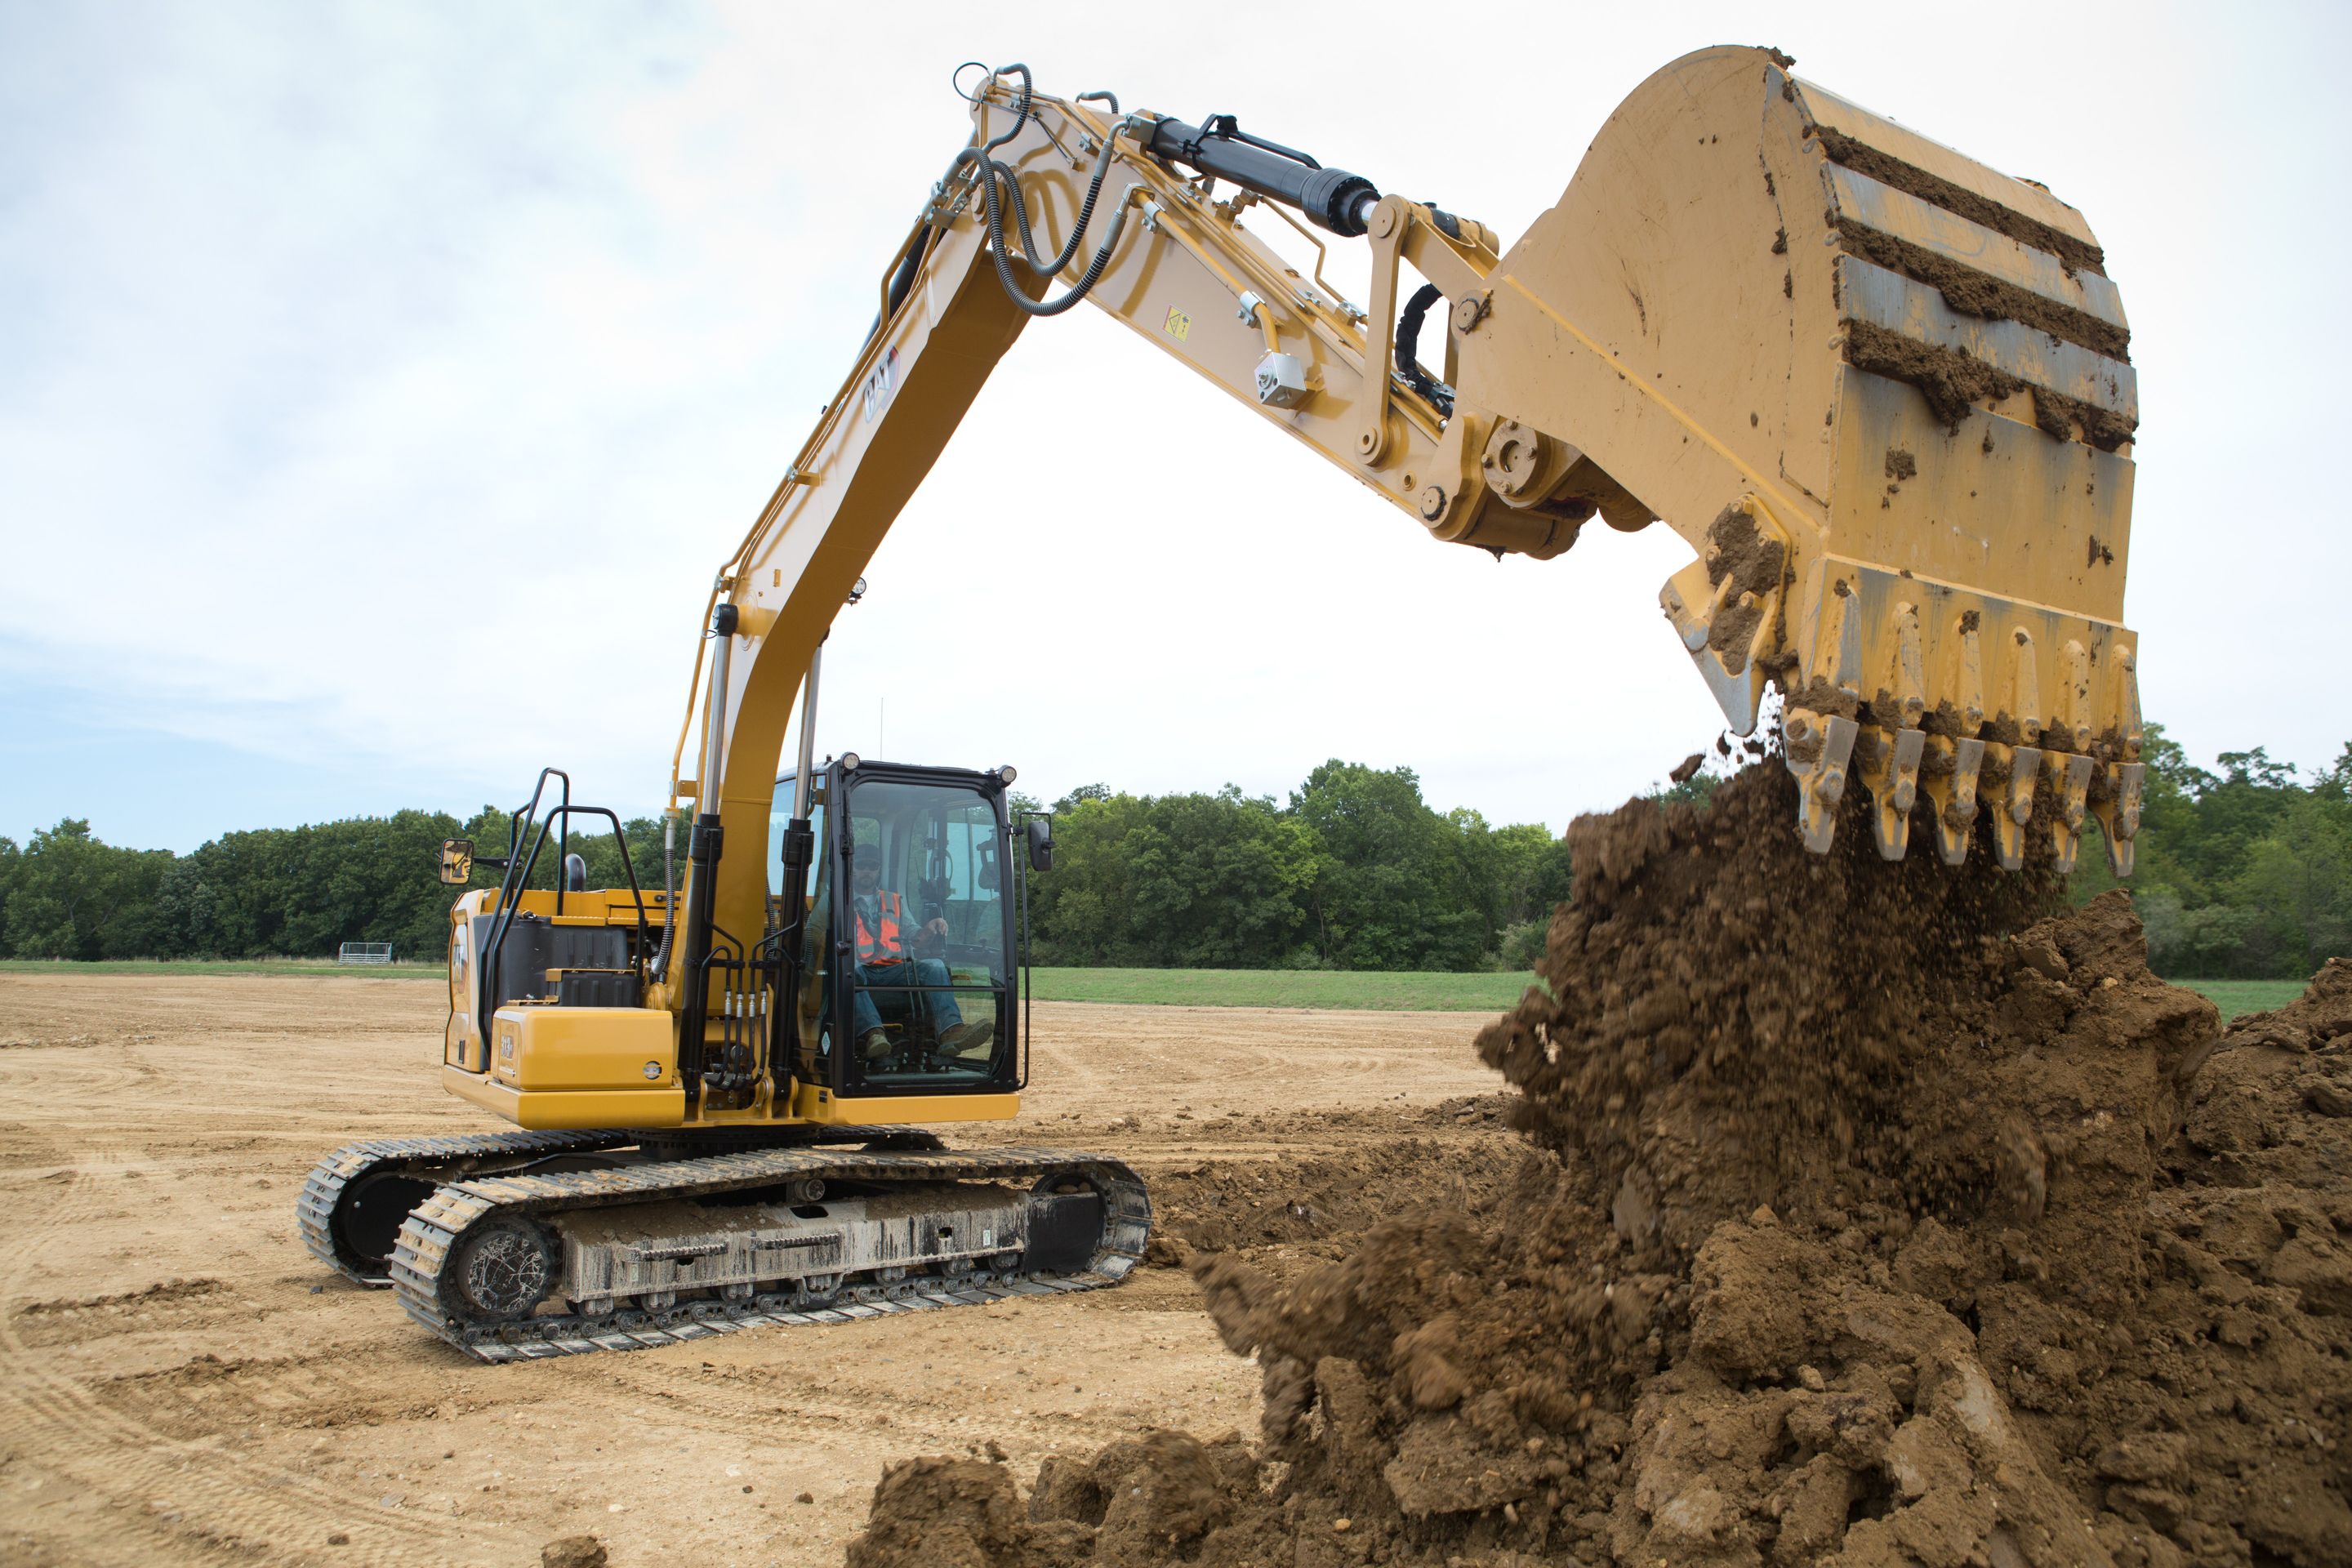 How To Choose the Right Excavator Size for Your Project